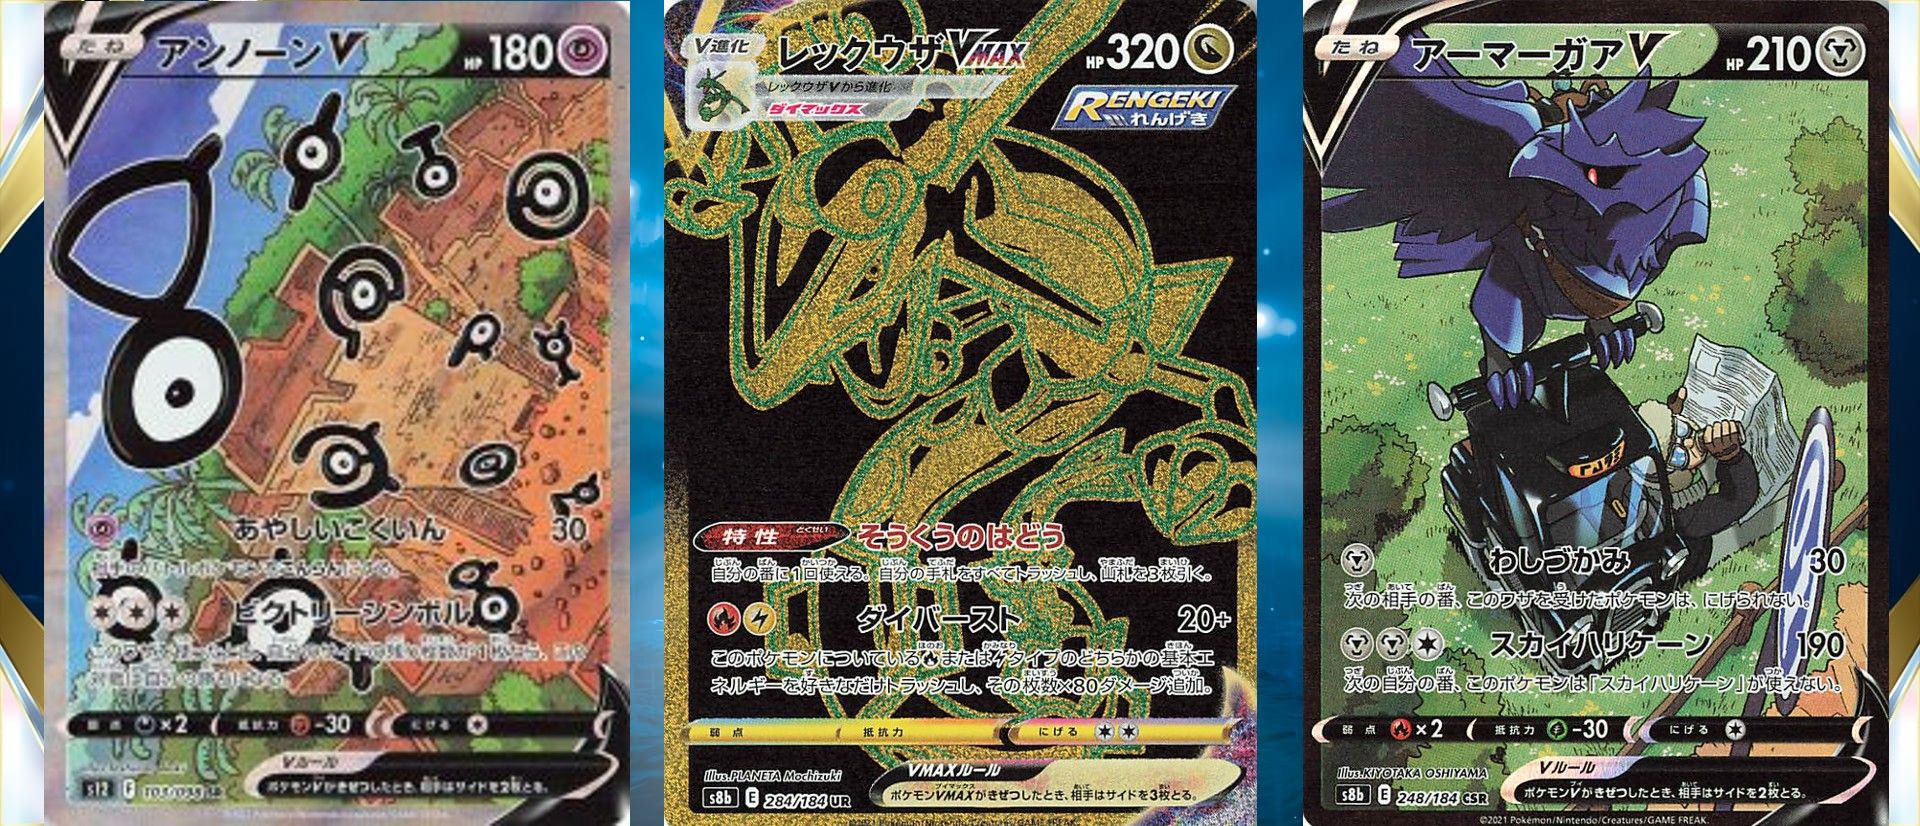 A collage of three different secret rares and trainer gallery cards from Pokémon TCG's Silver Tempest expansion. From left to right: Unown V Full Art, Rayquaza VMAX, and Corviknight V.